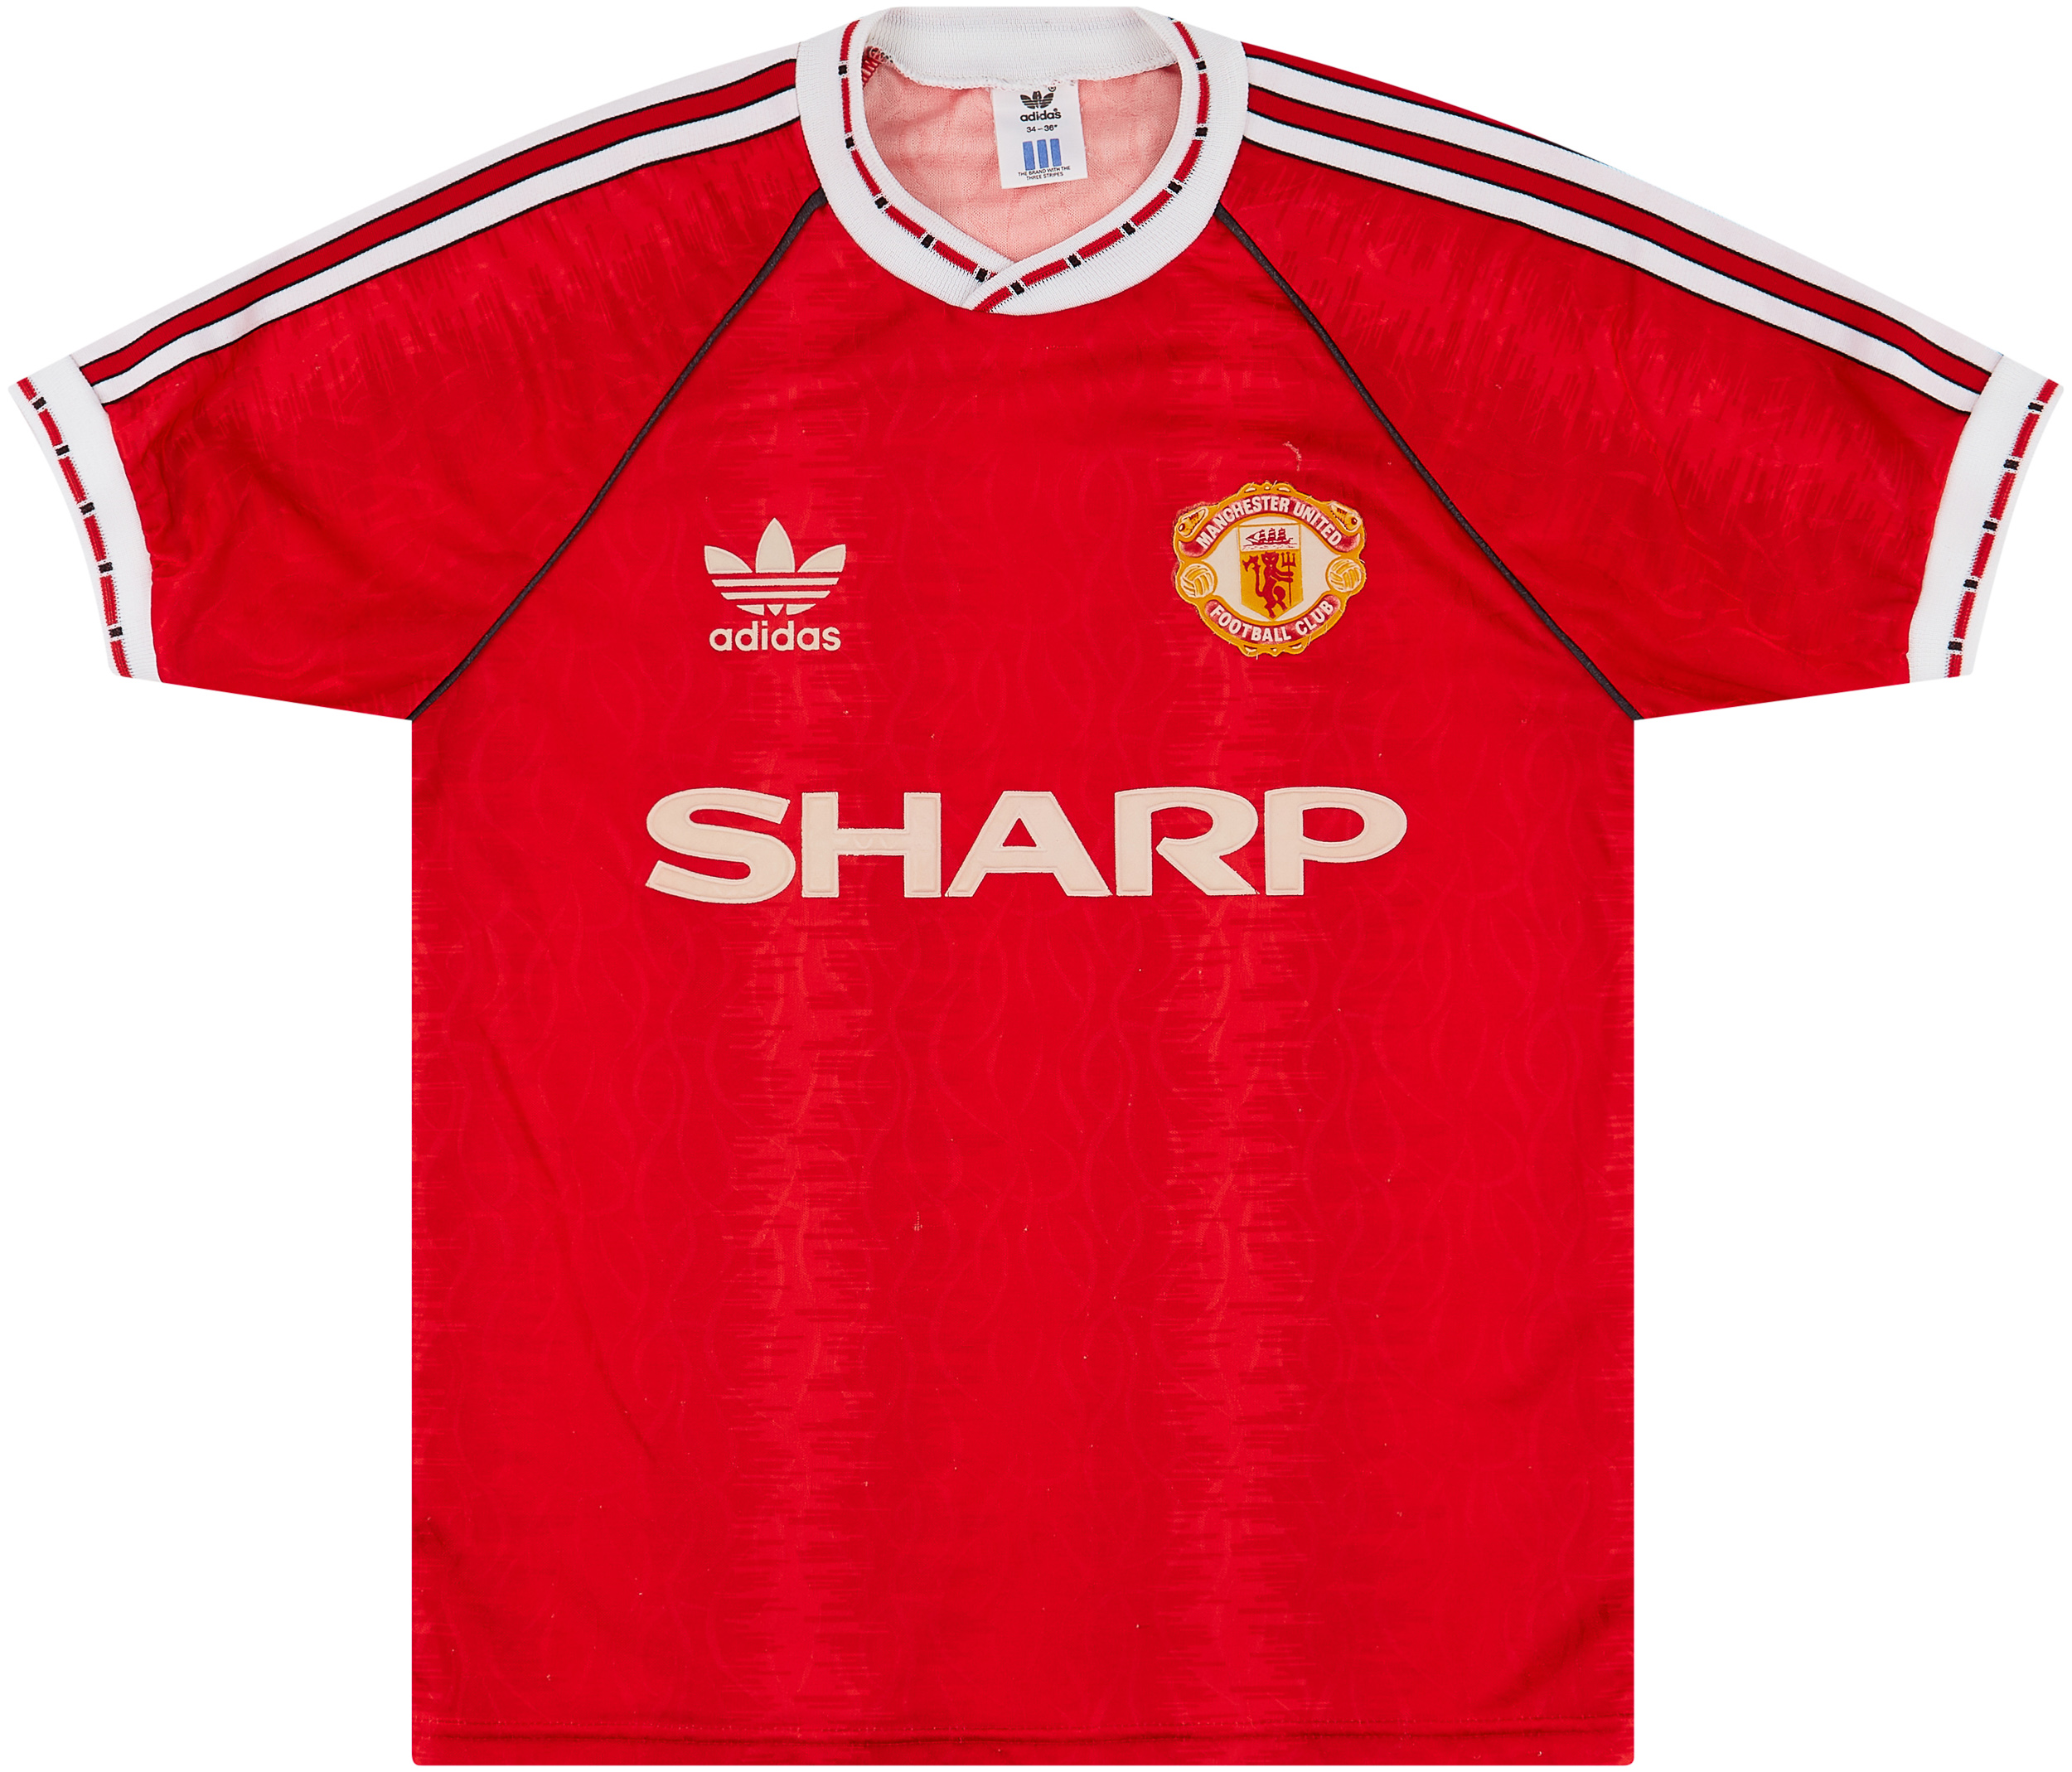 1990-92 Manchester United Home Shirt - 6/10 - ()